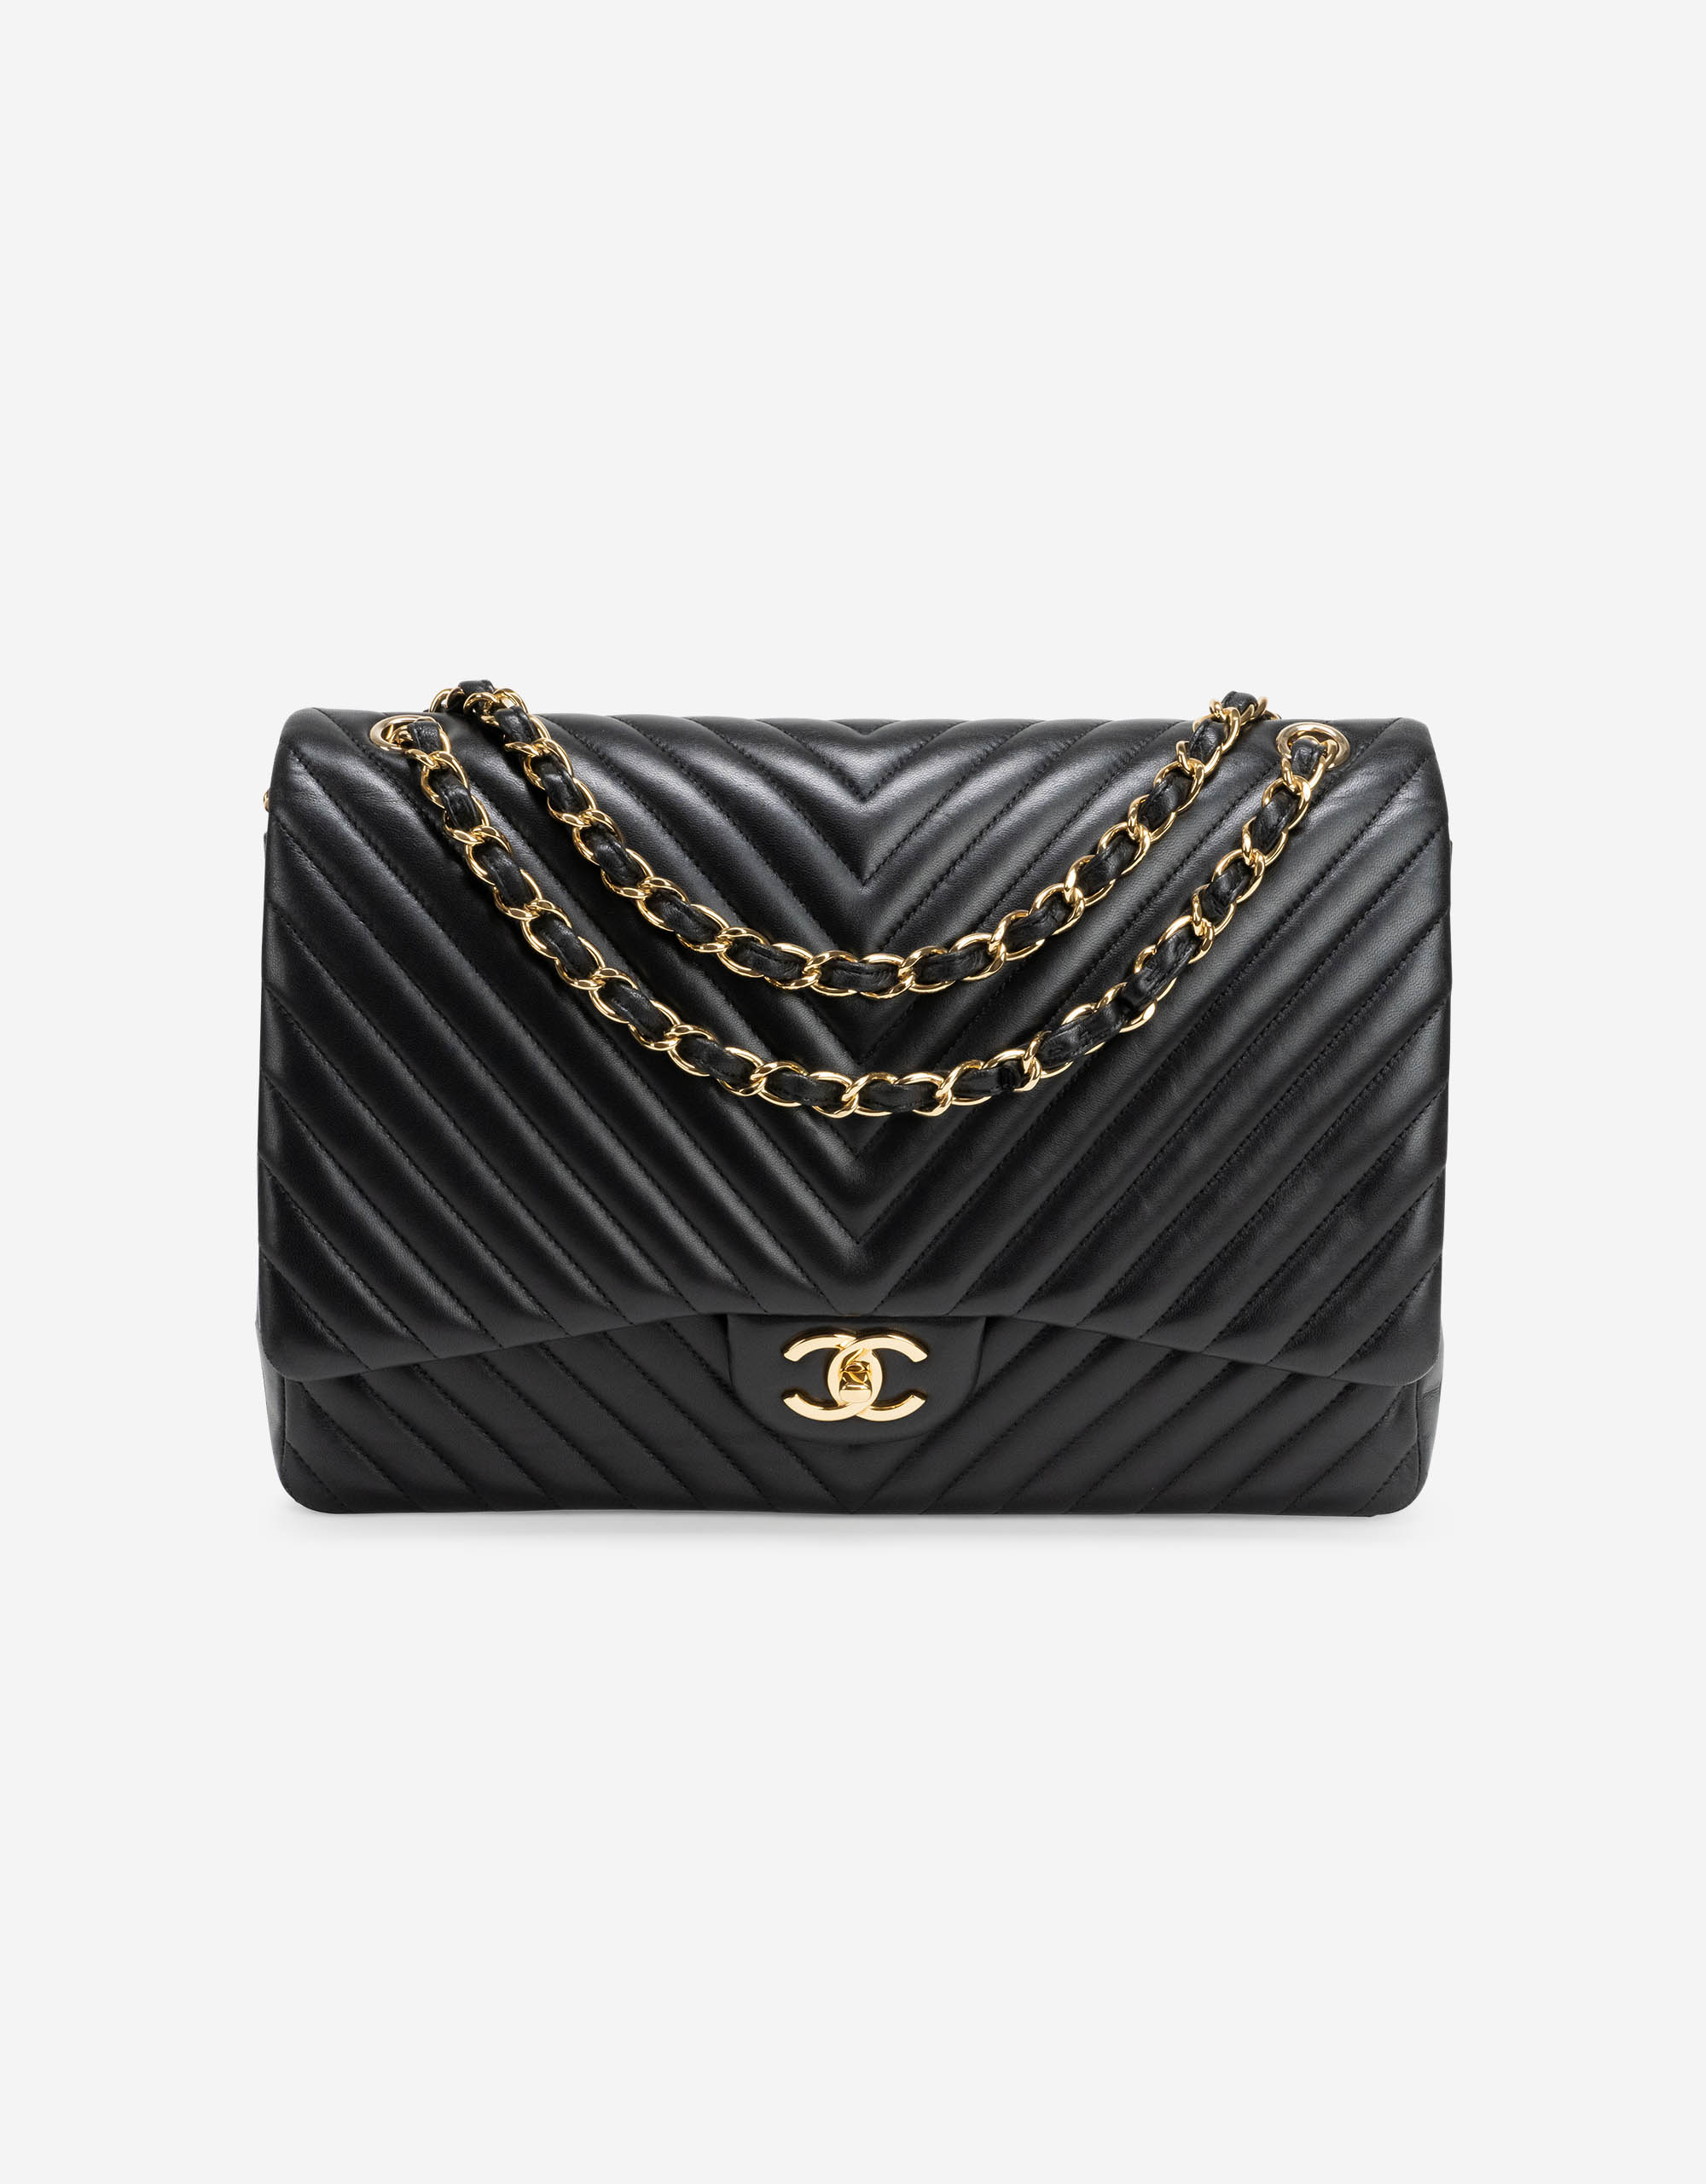 Chanel Chevron Lambskin Leather Maxi Double Flap Red with Gold Hardware